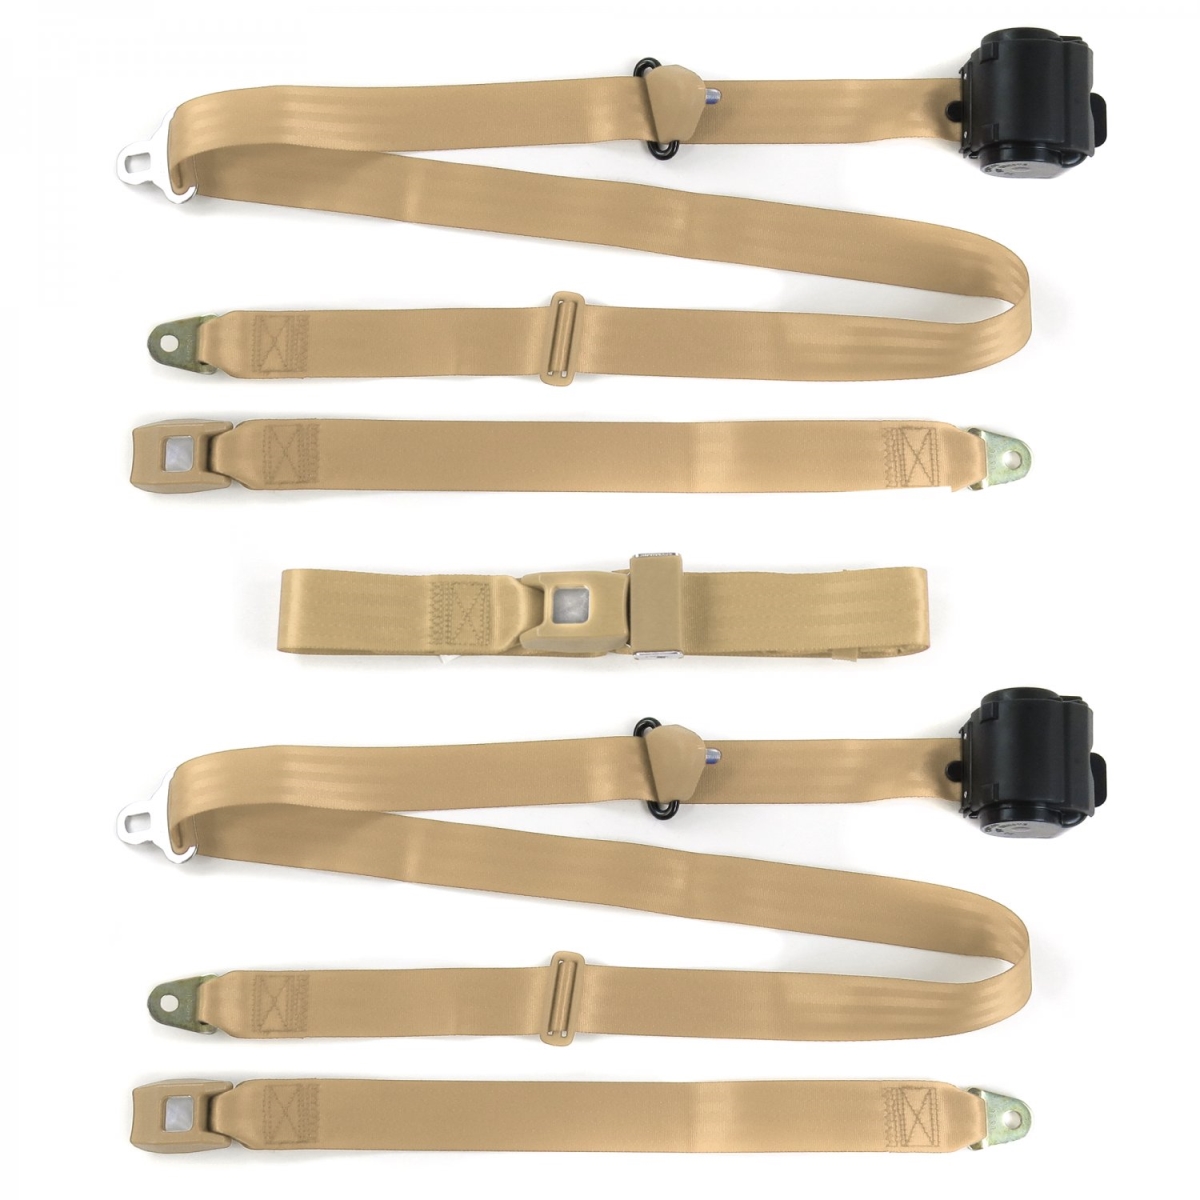 670855 Ford 1928-1931 Model A Standard 3 Point Tan Retractable Bench Seat Belt Kit - 3 Belts -  safeTboy